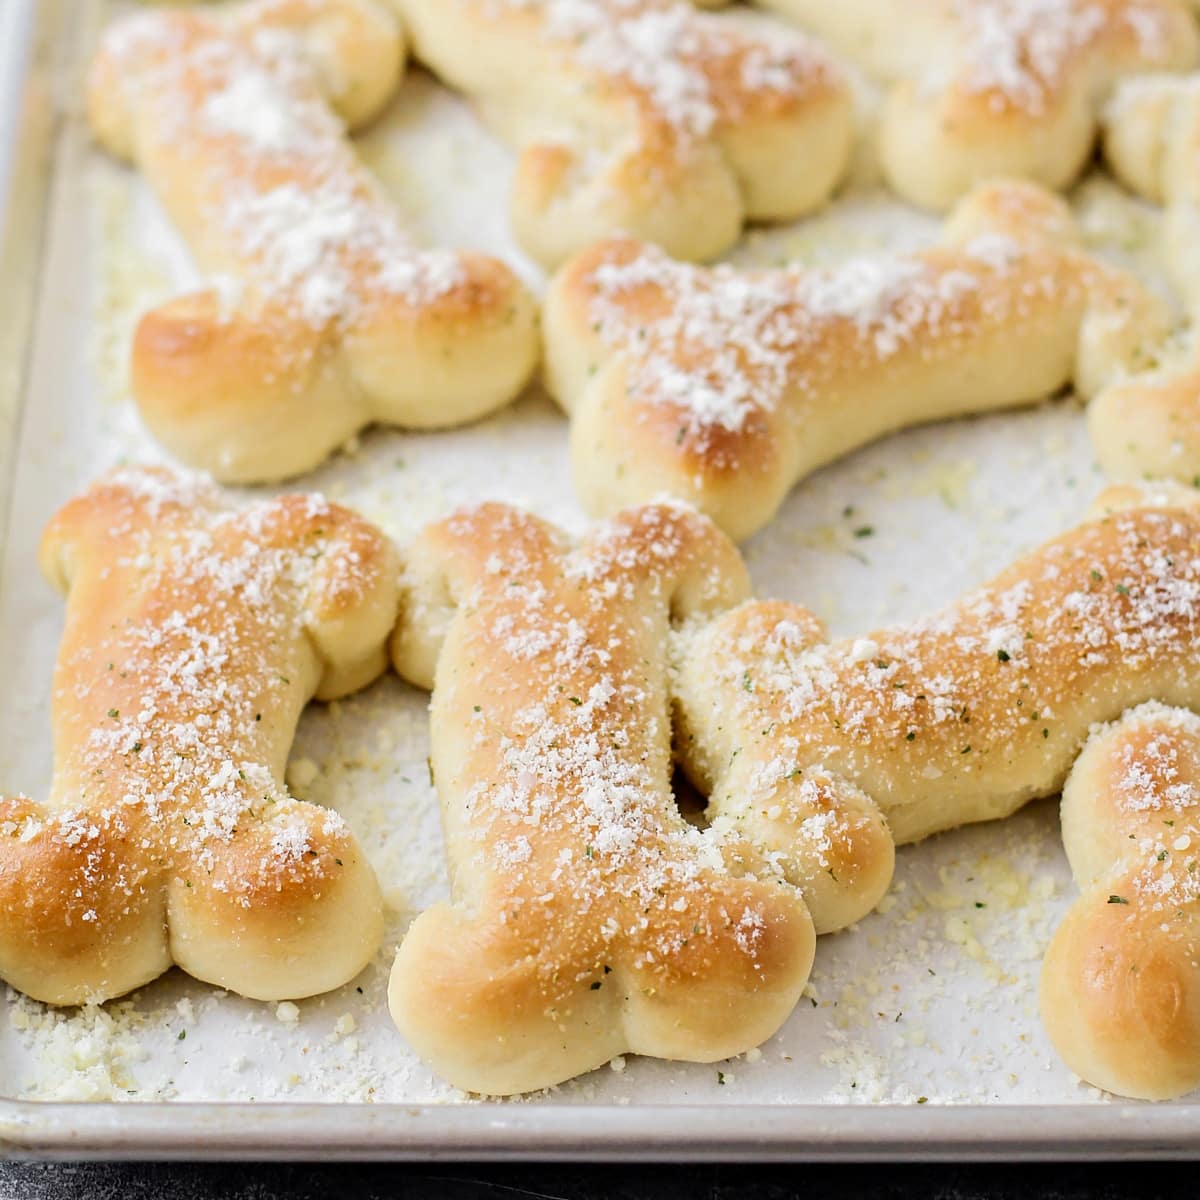 Sprinkling breadsticks with cheese and herbs.